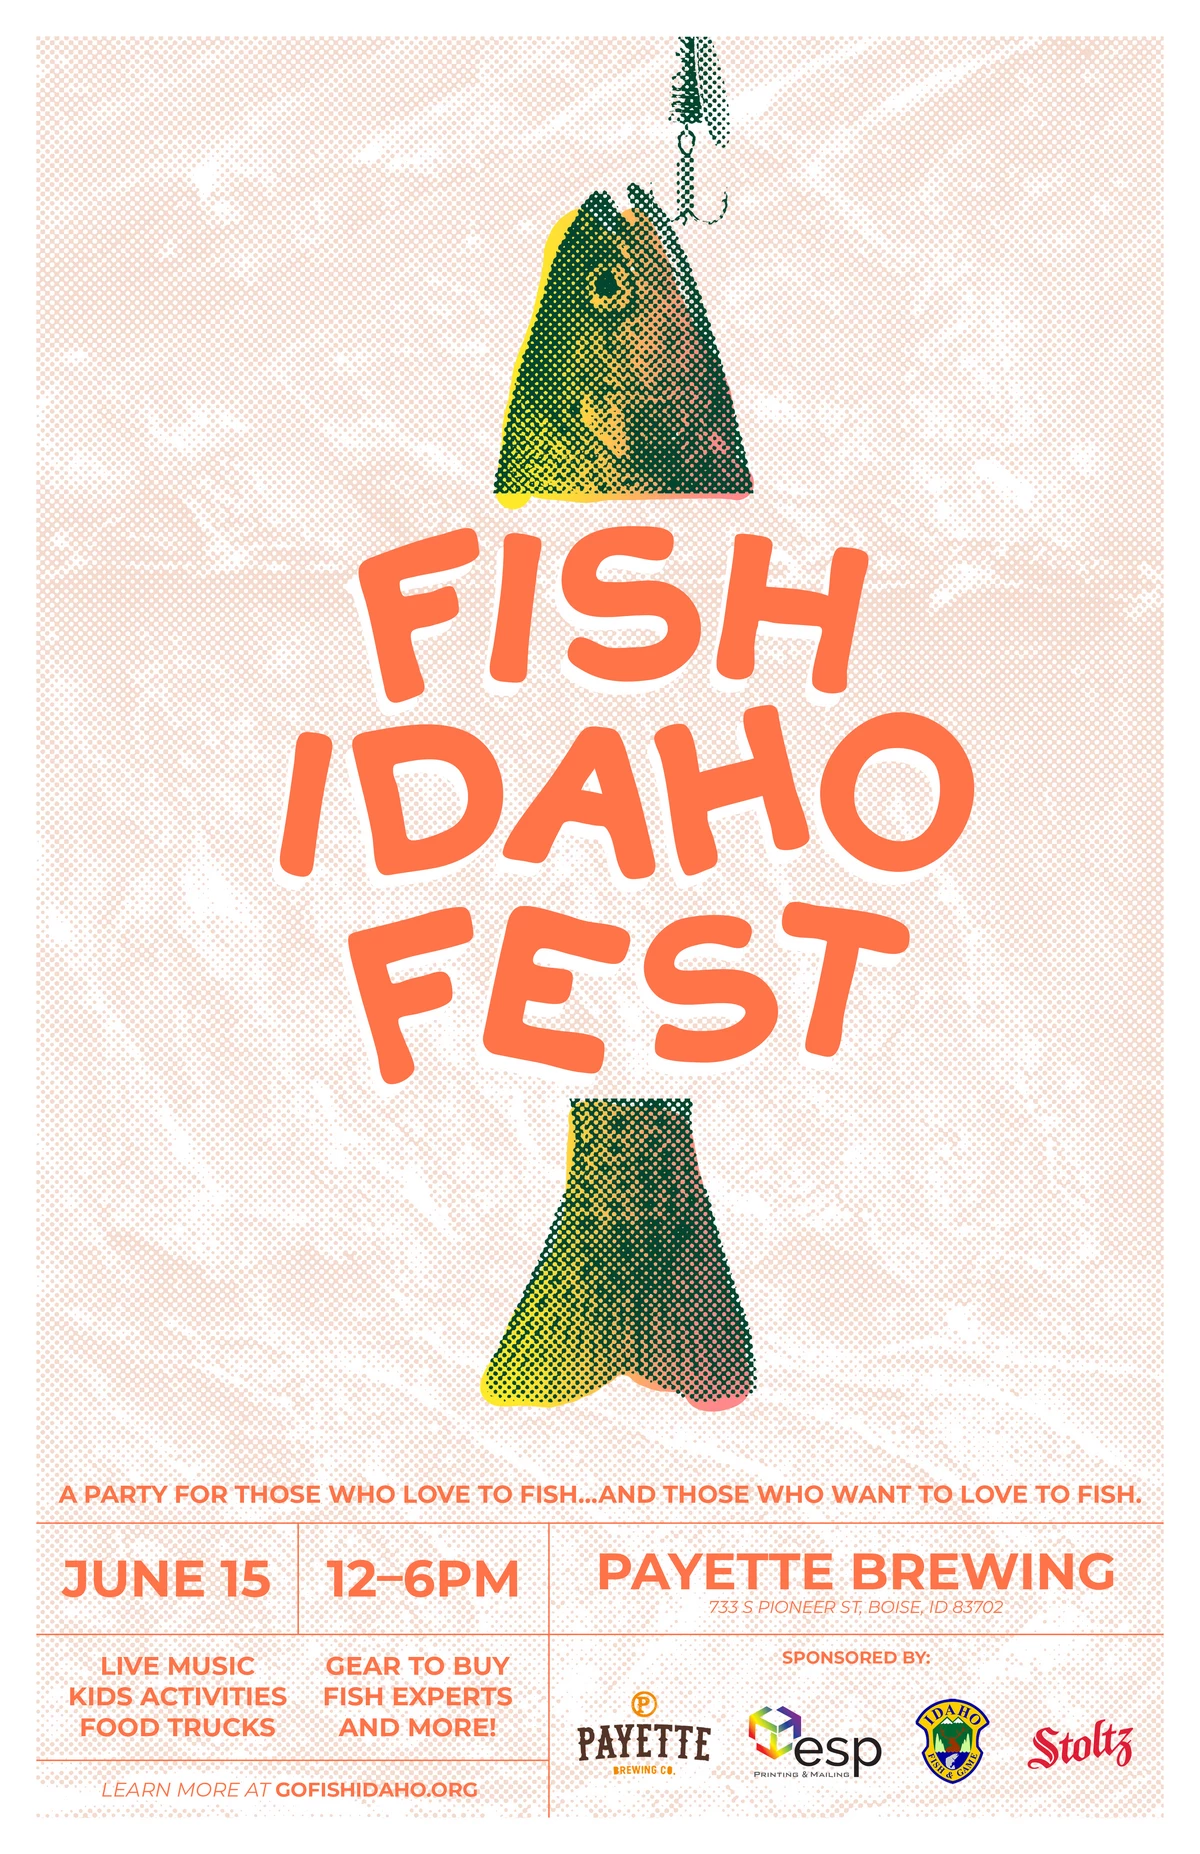 Fish Idaho Fest June 15th with Idaho Fish and Game